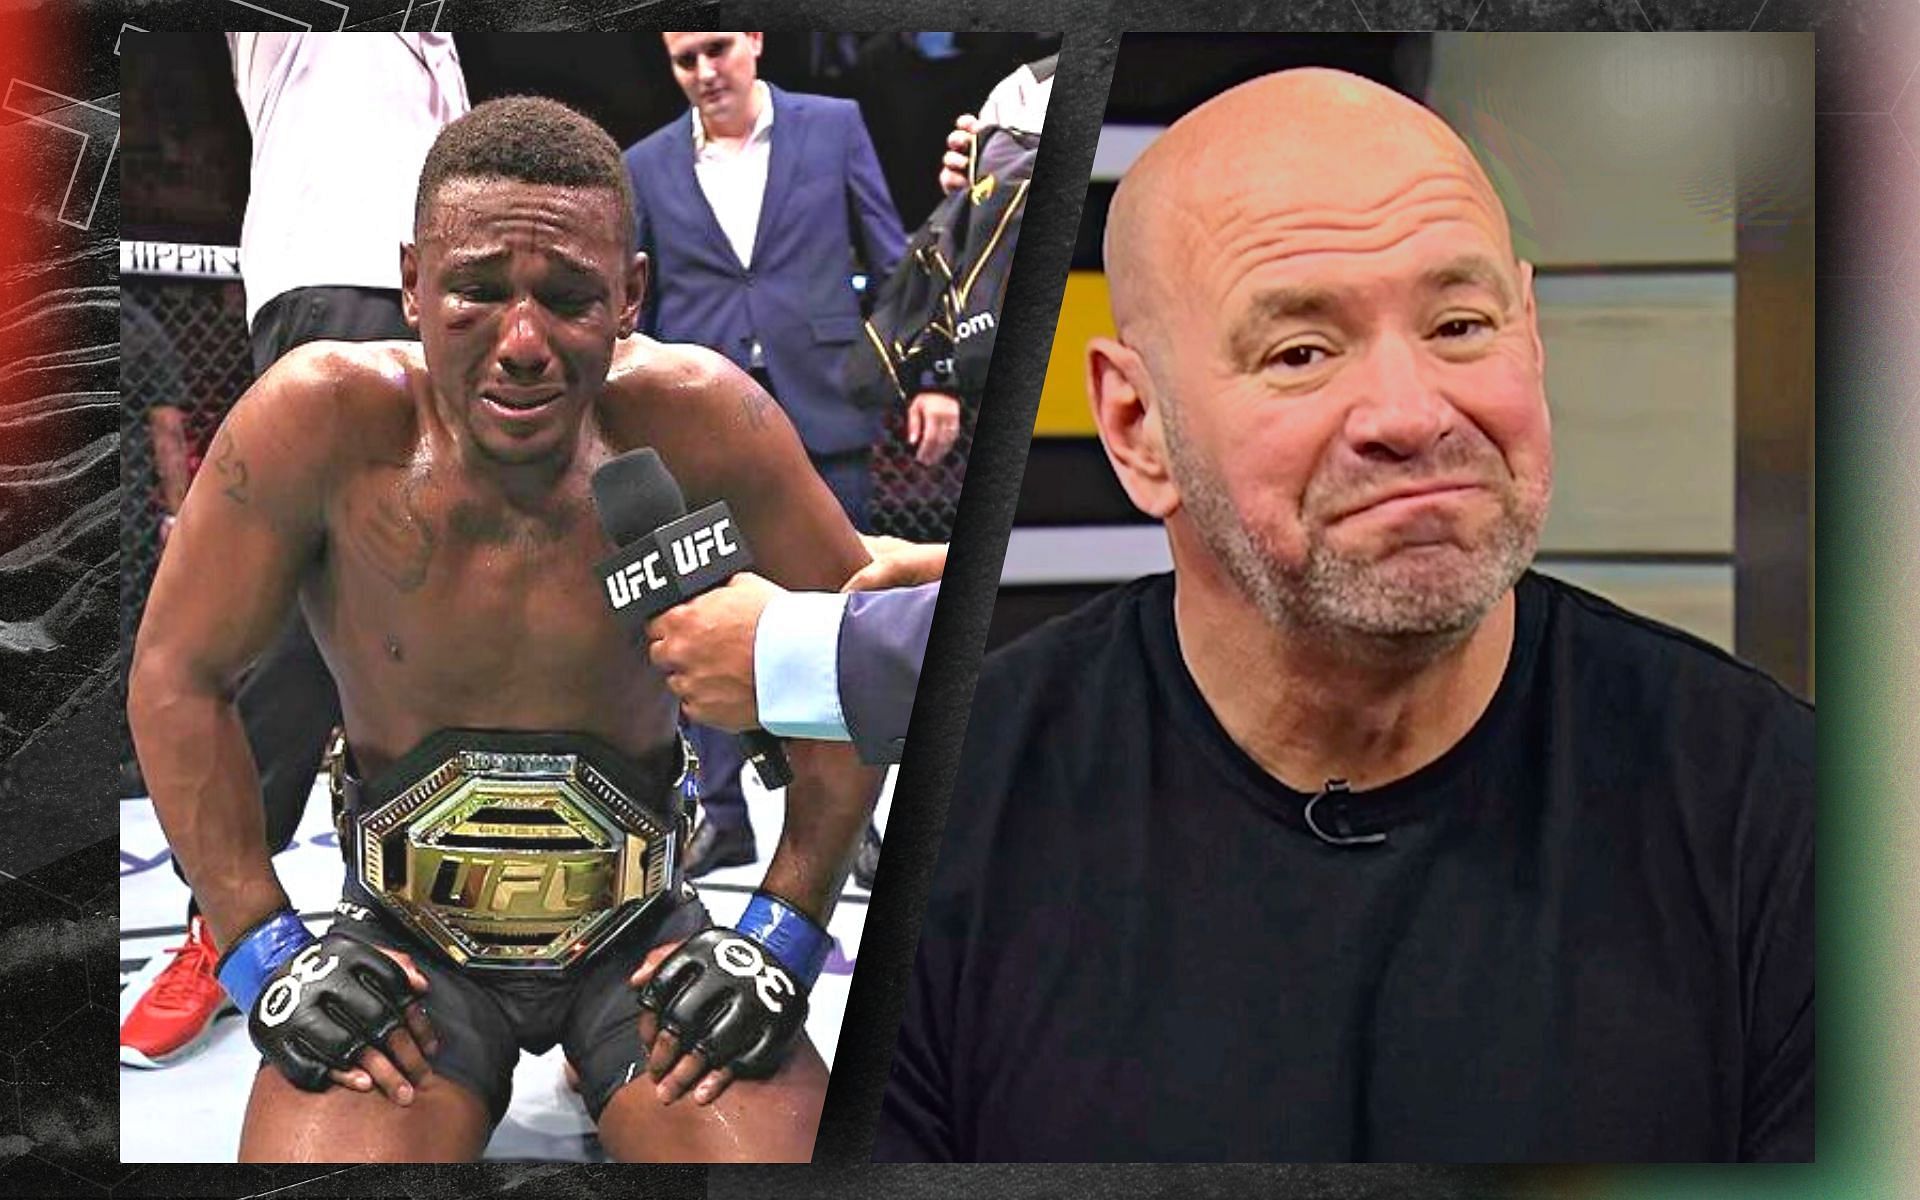 Jamahal Hill (left) questions UFC P4P rankings [Image credits: @sweet_dreams_jhill &amp; @danawhite on Instagram]